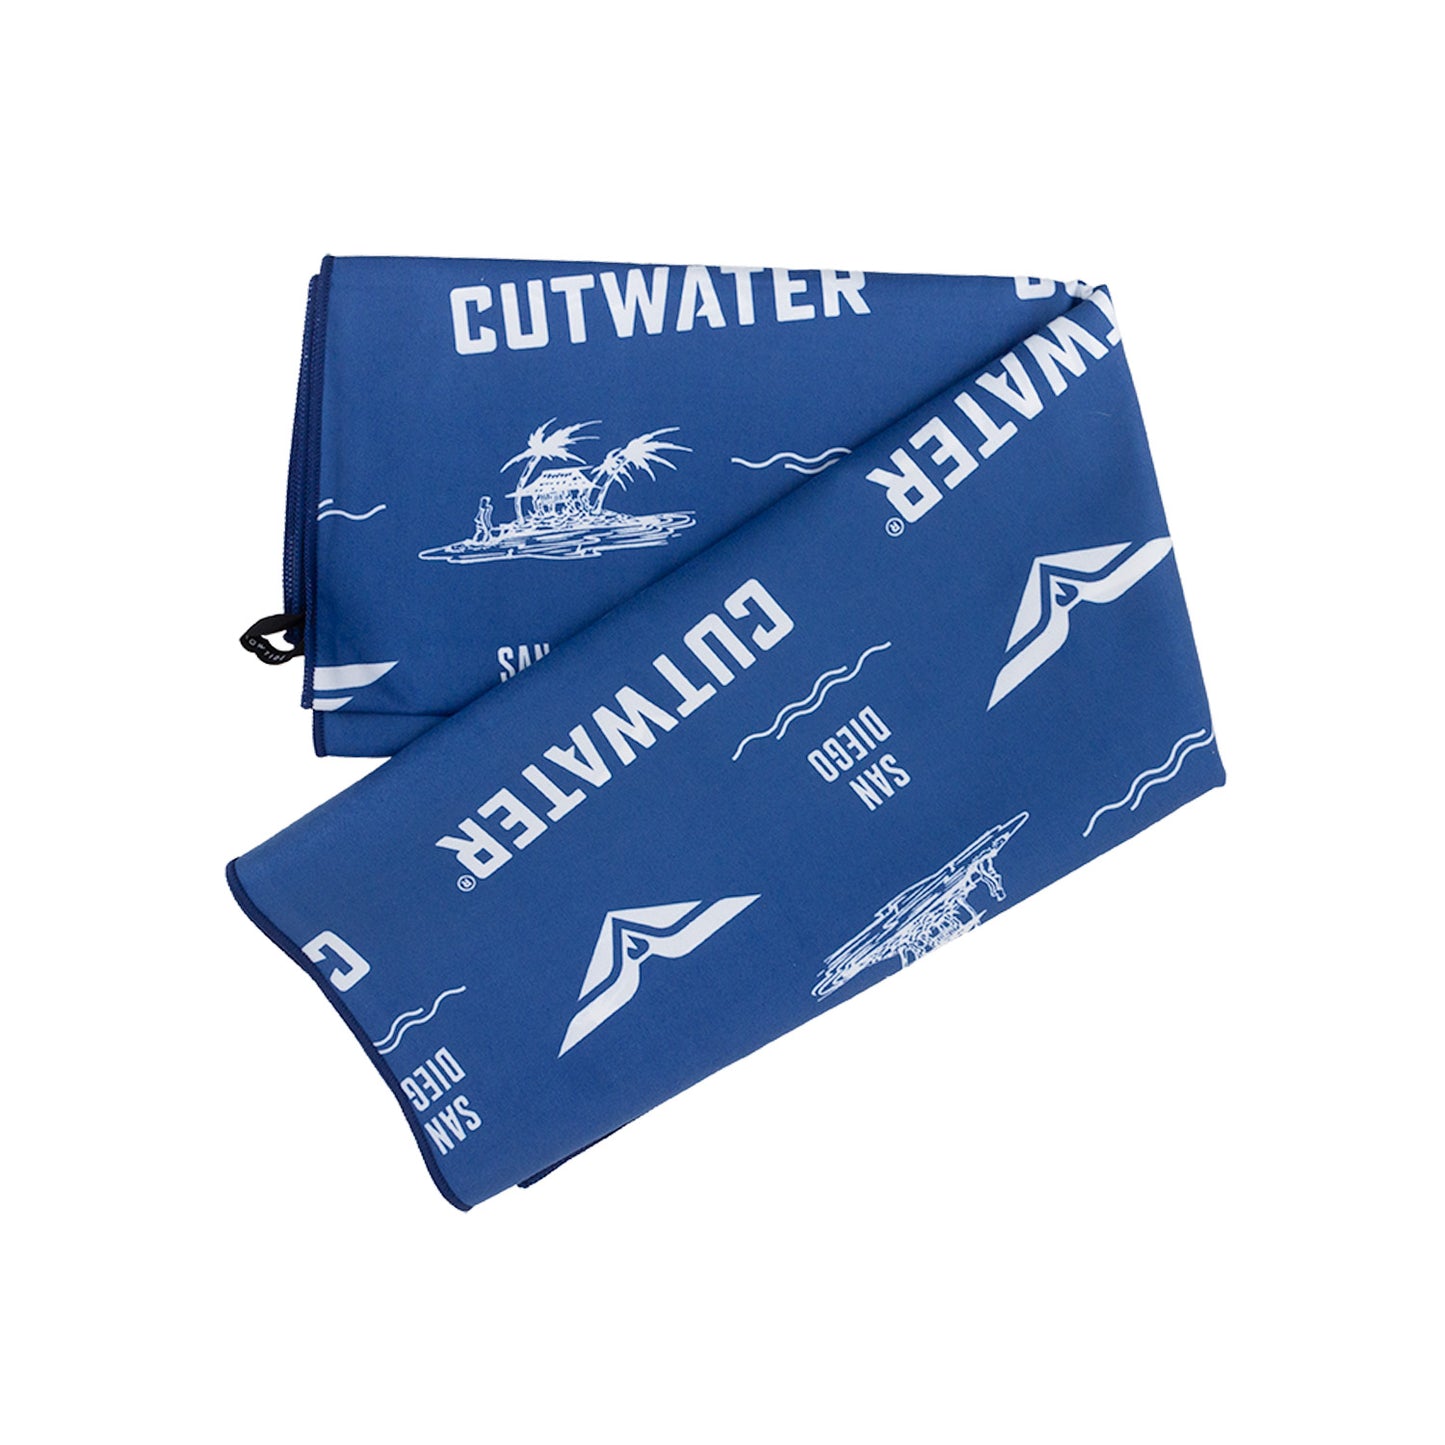 Cutwater x Slowtide Quick-Dry Towel